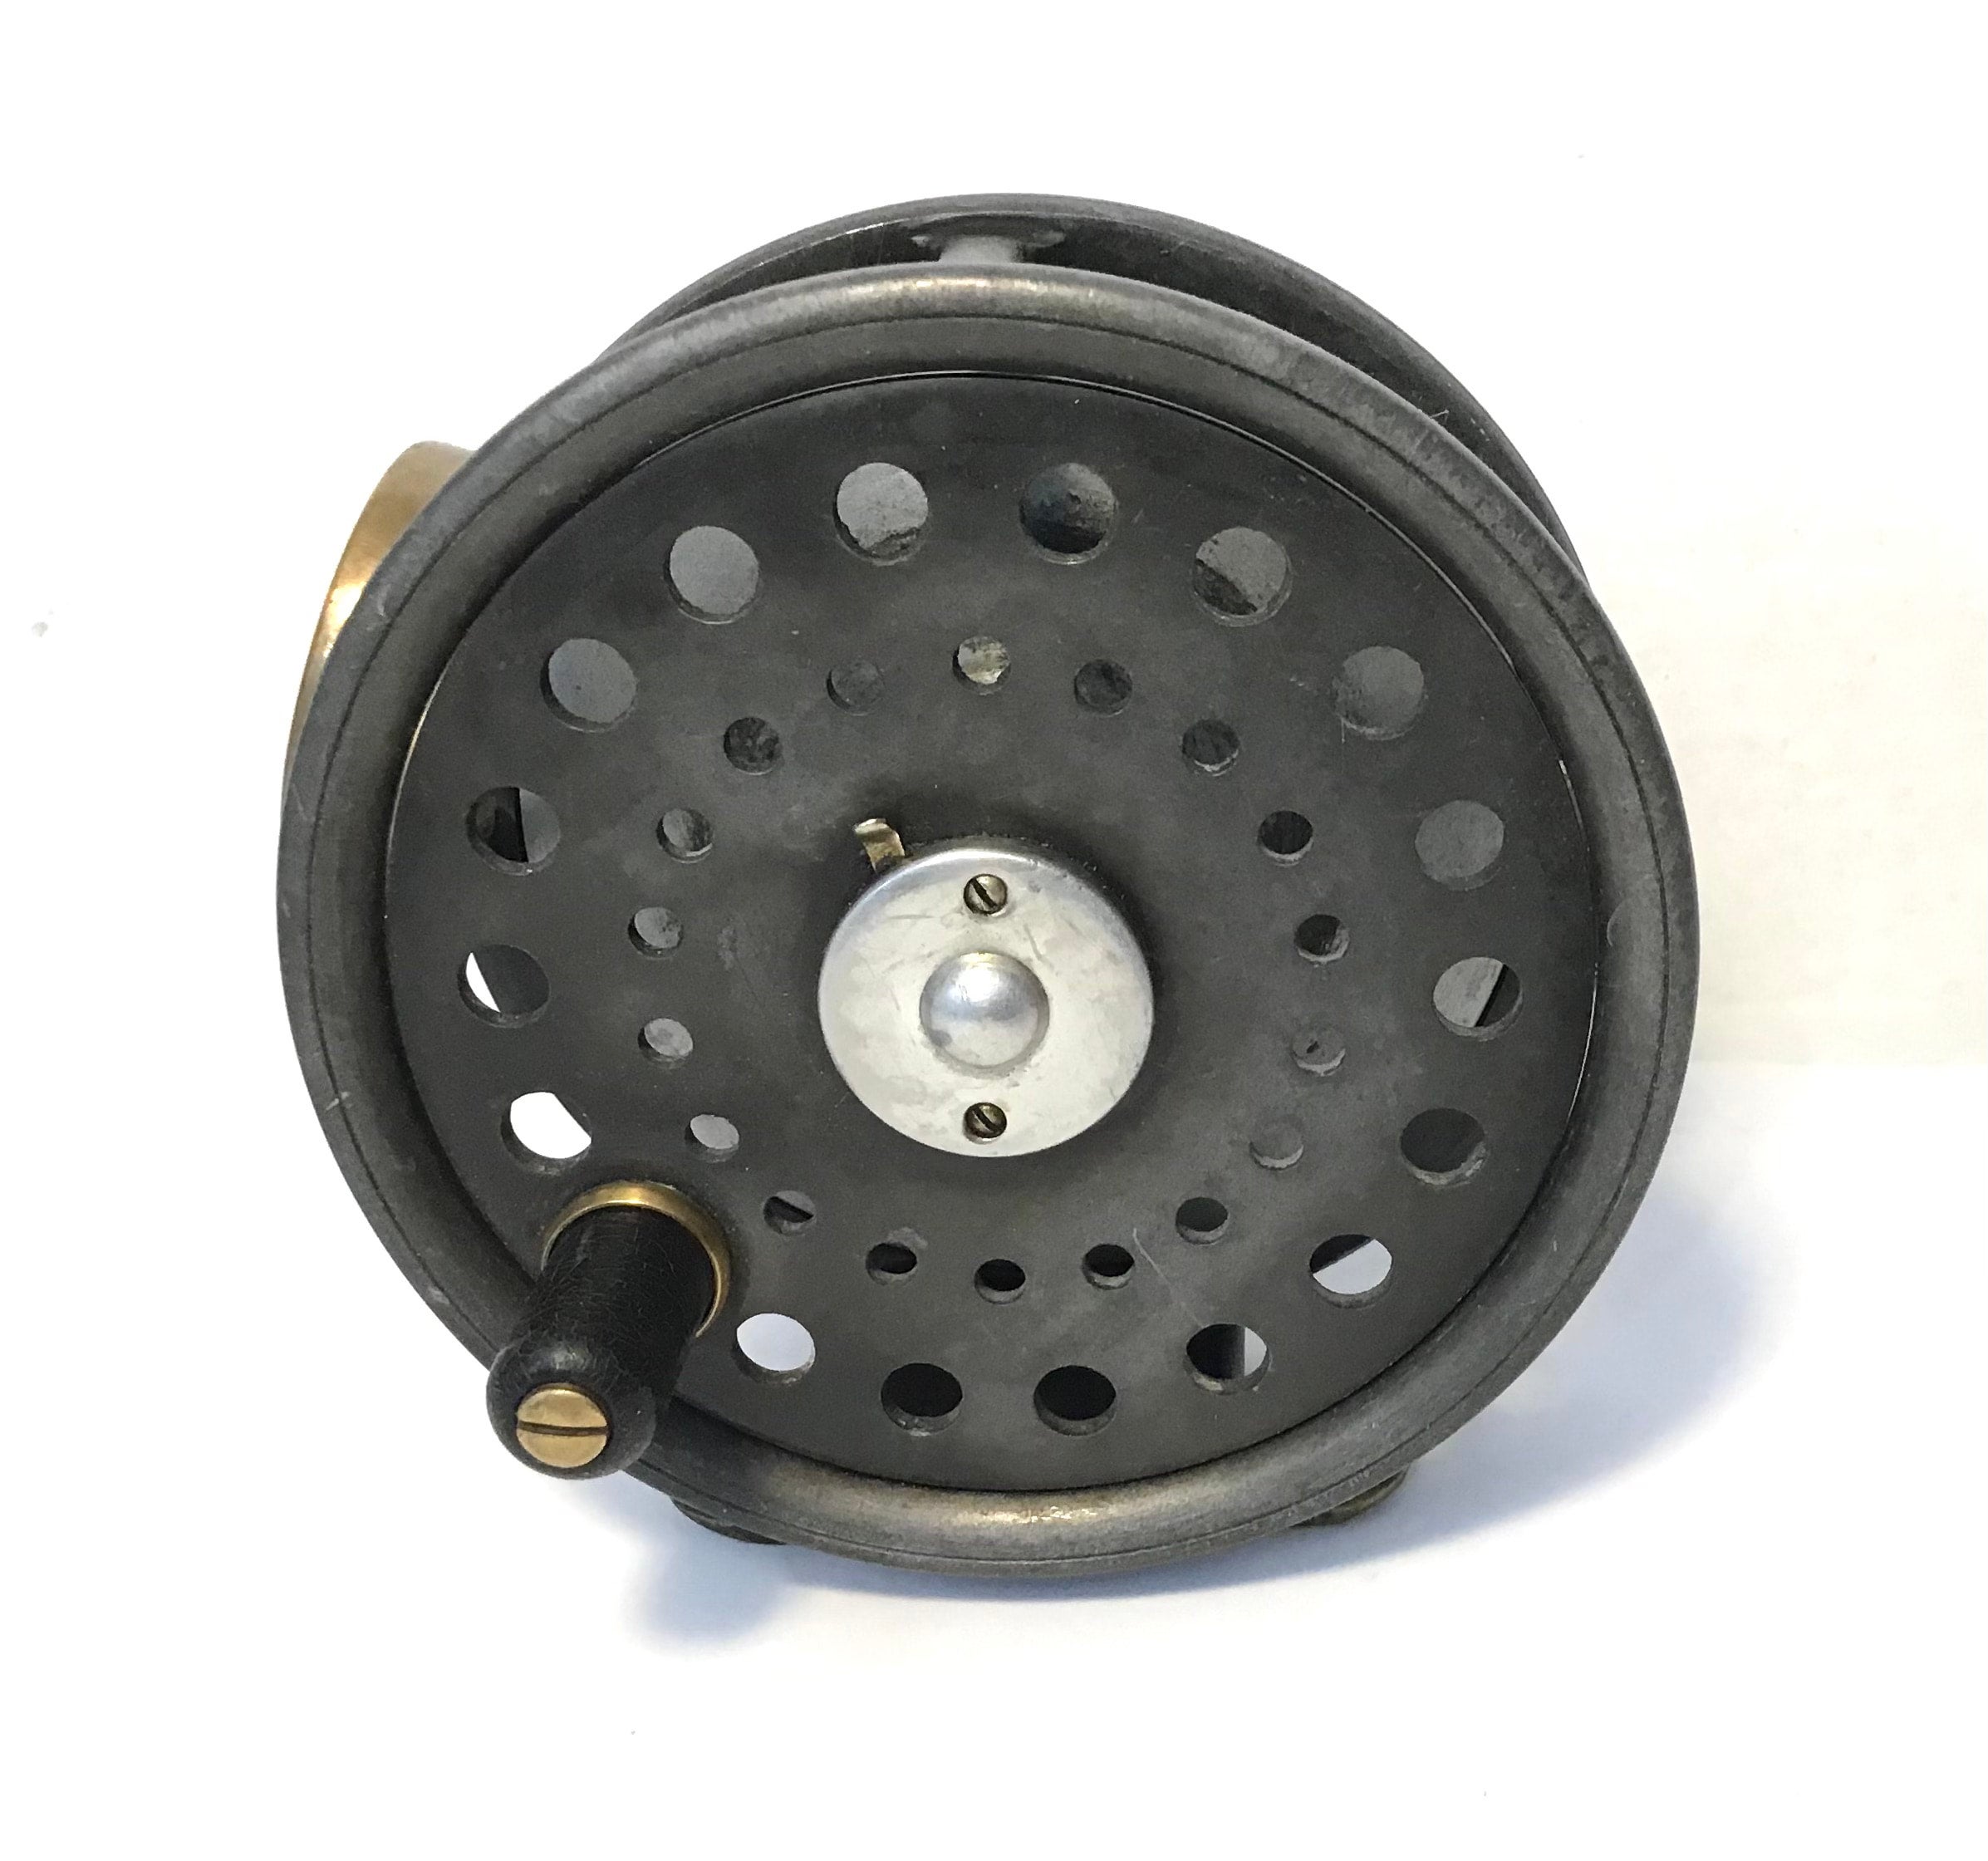 Vintage Fly Reel Fly Reels - 9 For Sale on 1stDibs  vintage fly reels for  sale, vintage fly fishing reels, classic fly reels for sale